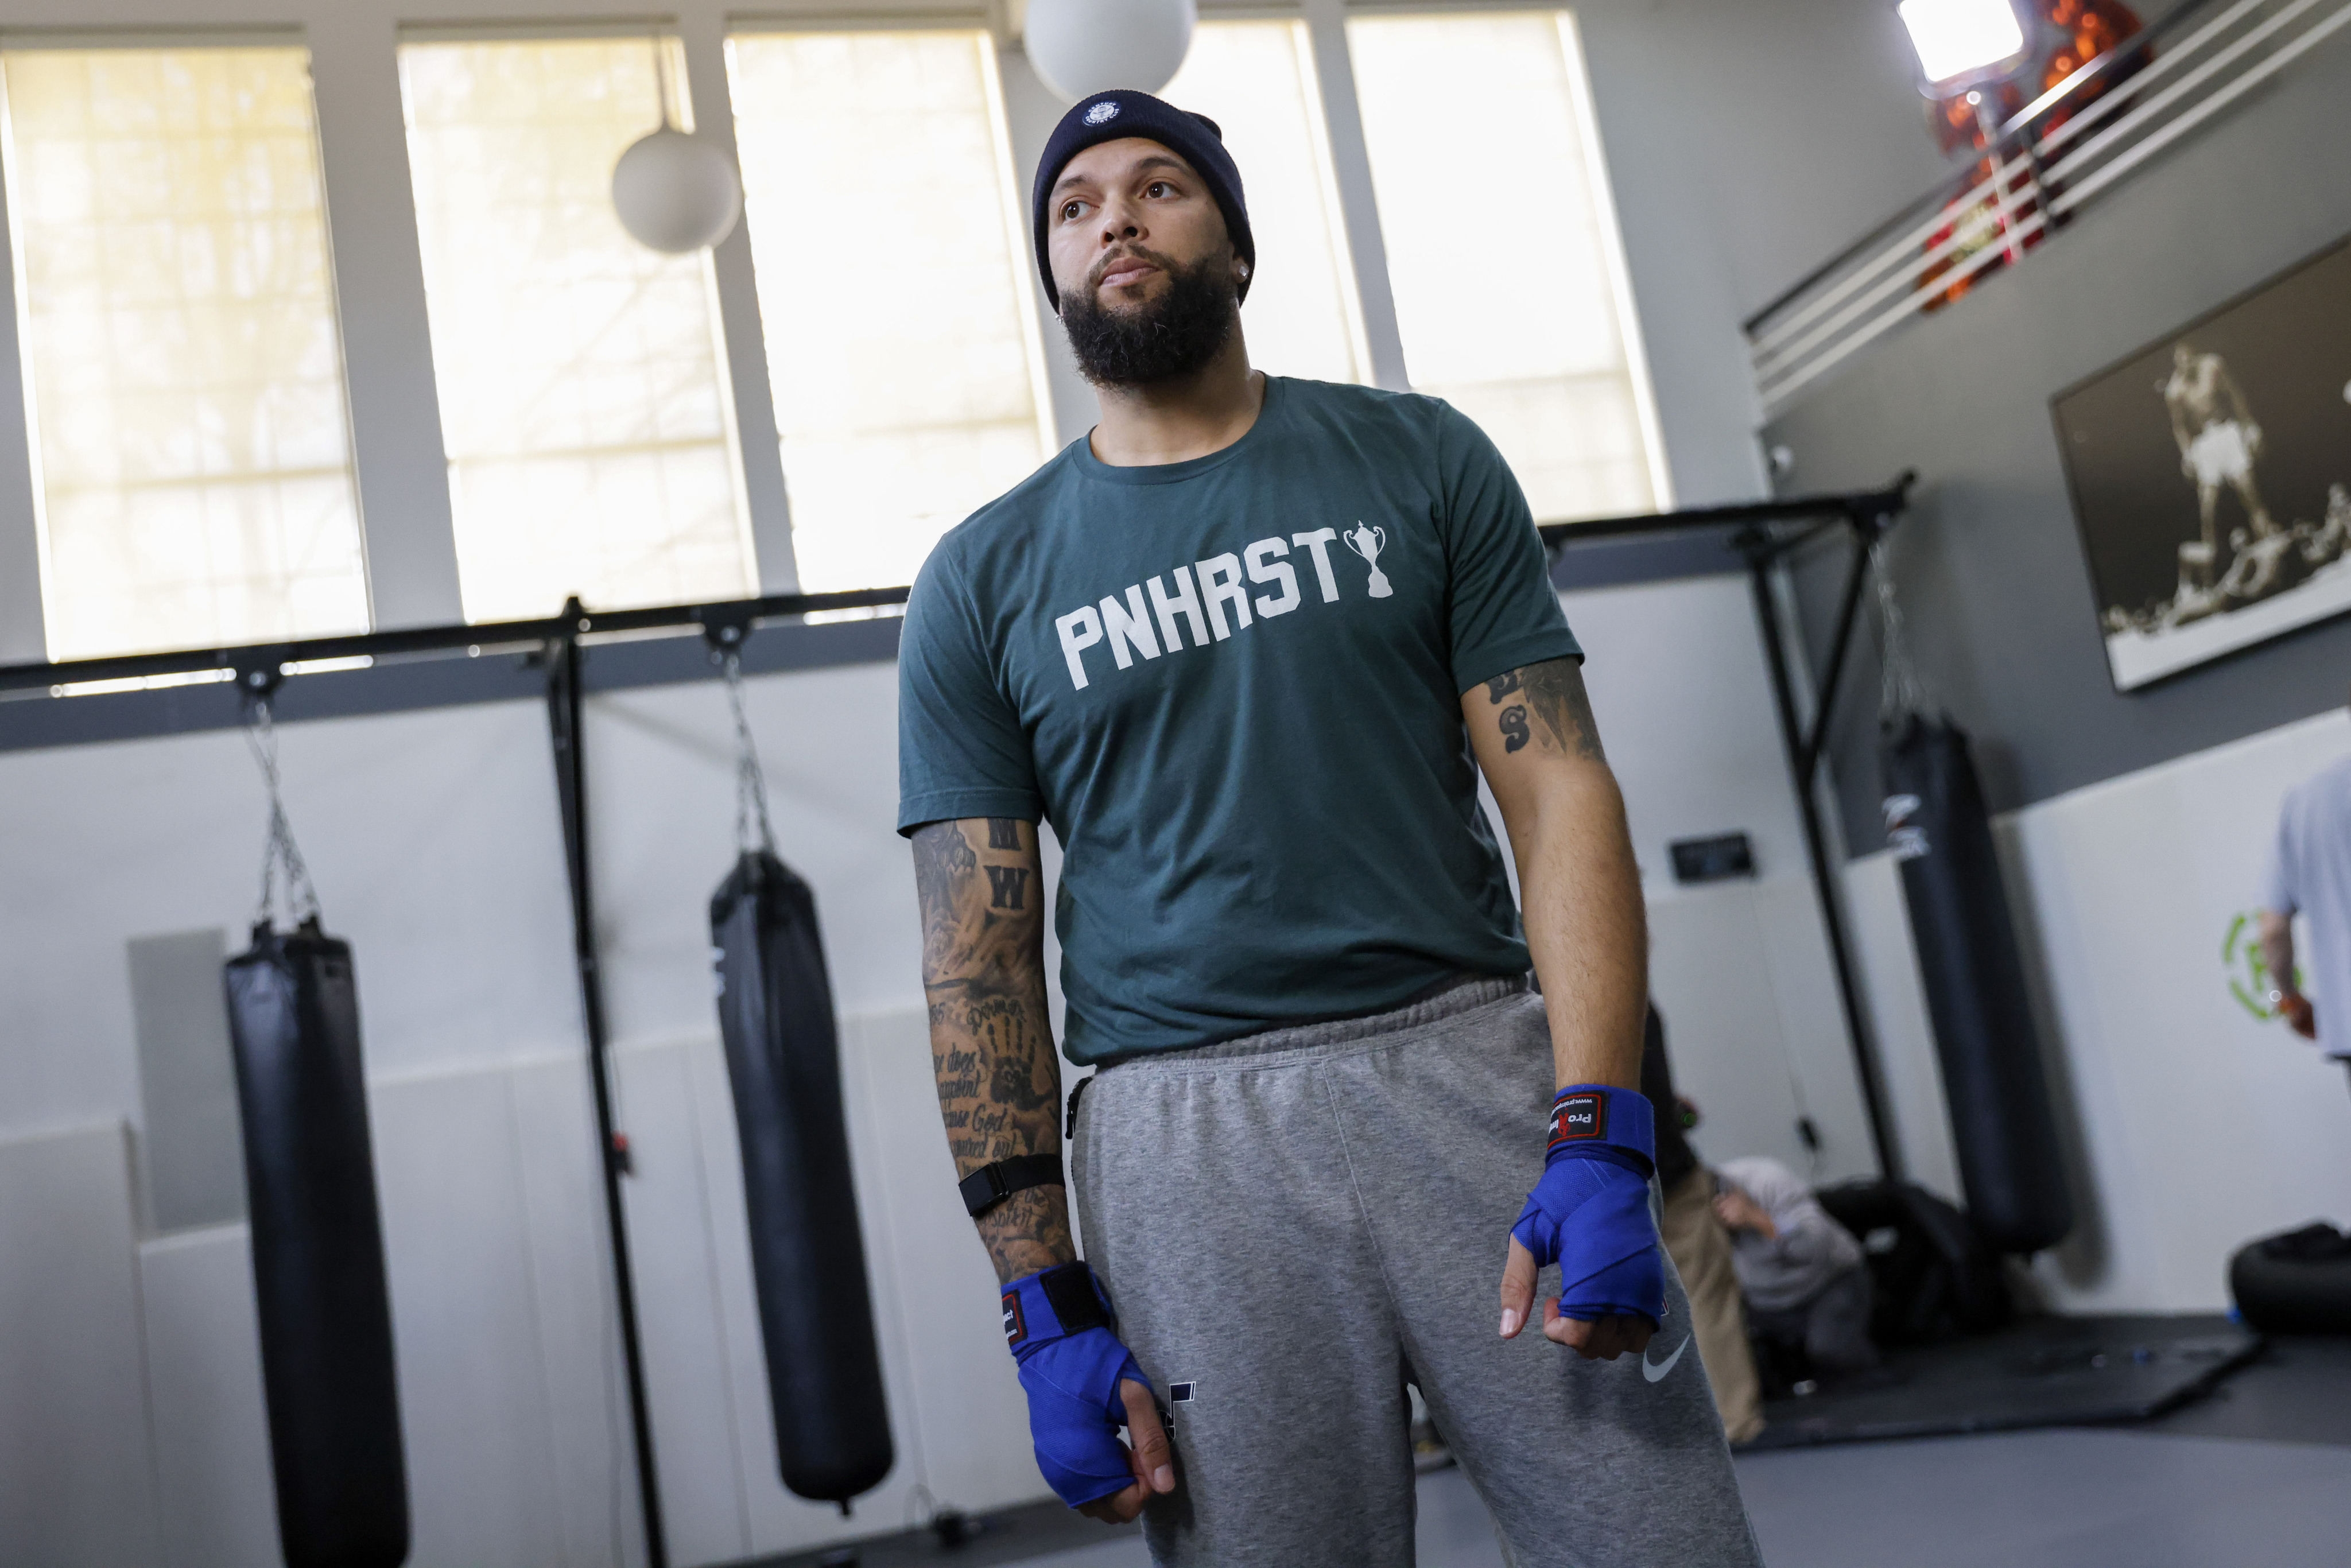 Deron Williams Opens MMA Gym in Dallas, Wants to Compete After NBA Career, News, Scores, Highlights, Stats, and Rumors